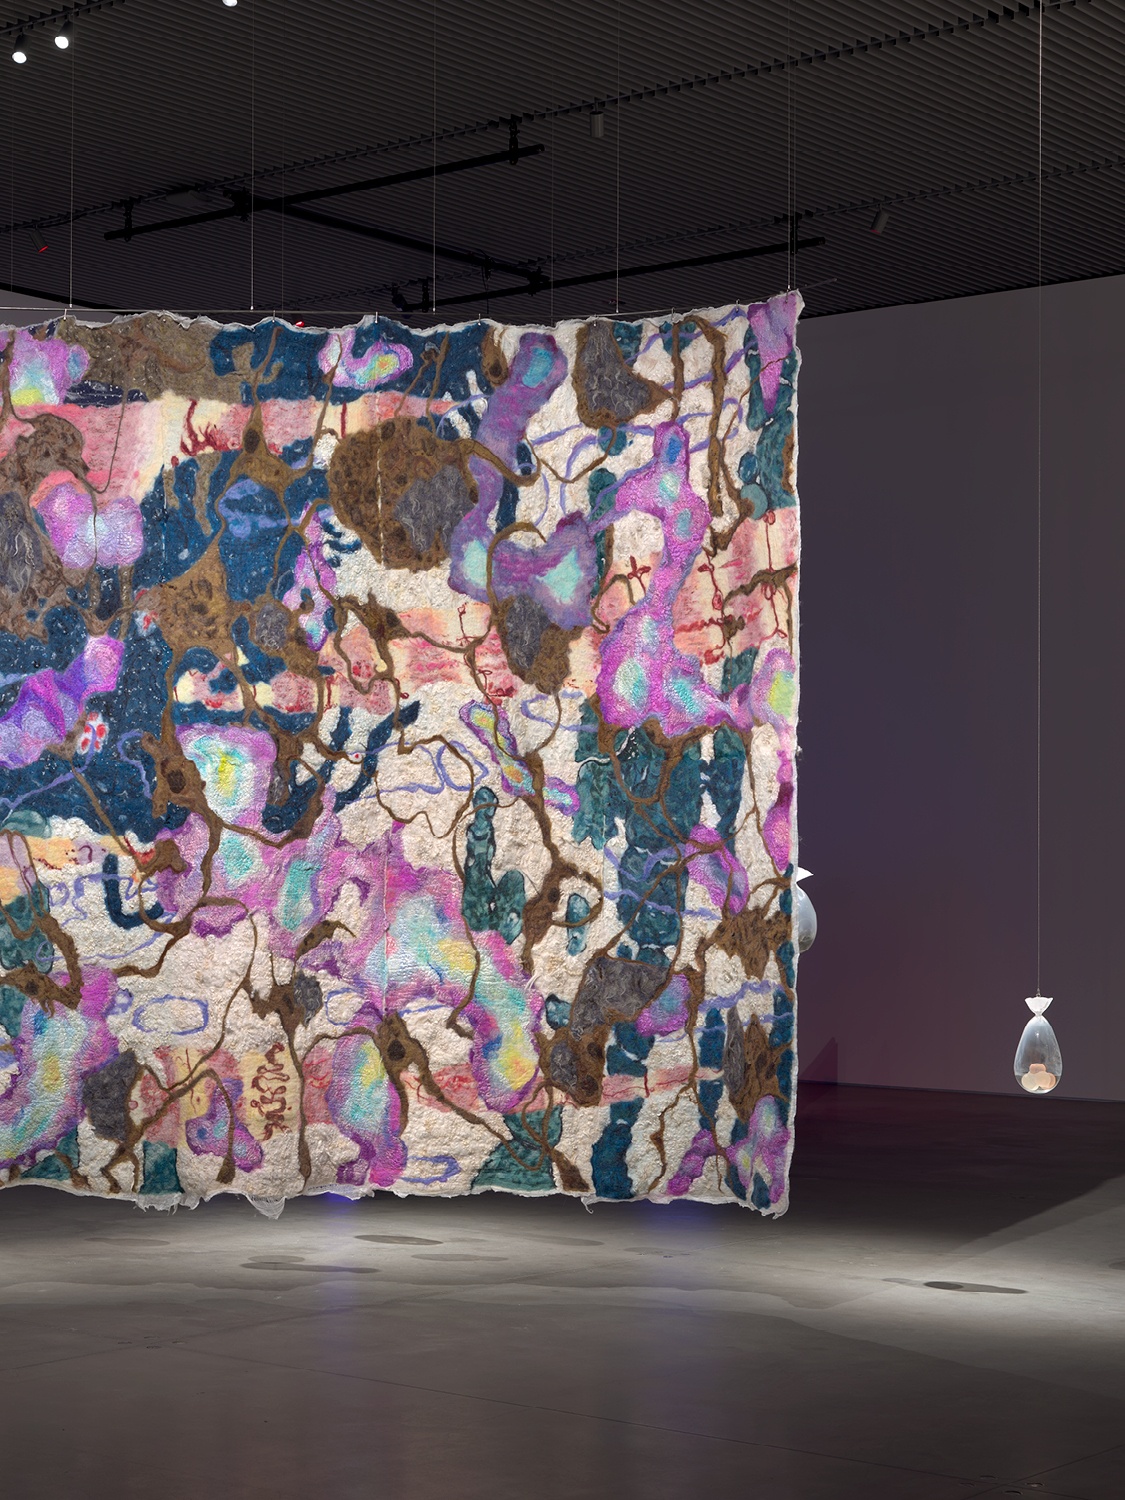 An abstract felt tapestry made of squiggly lines and shapes of predominantly purple and pink tones. To the side, a glass object hangs to counterbalance the tapestry.